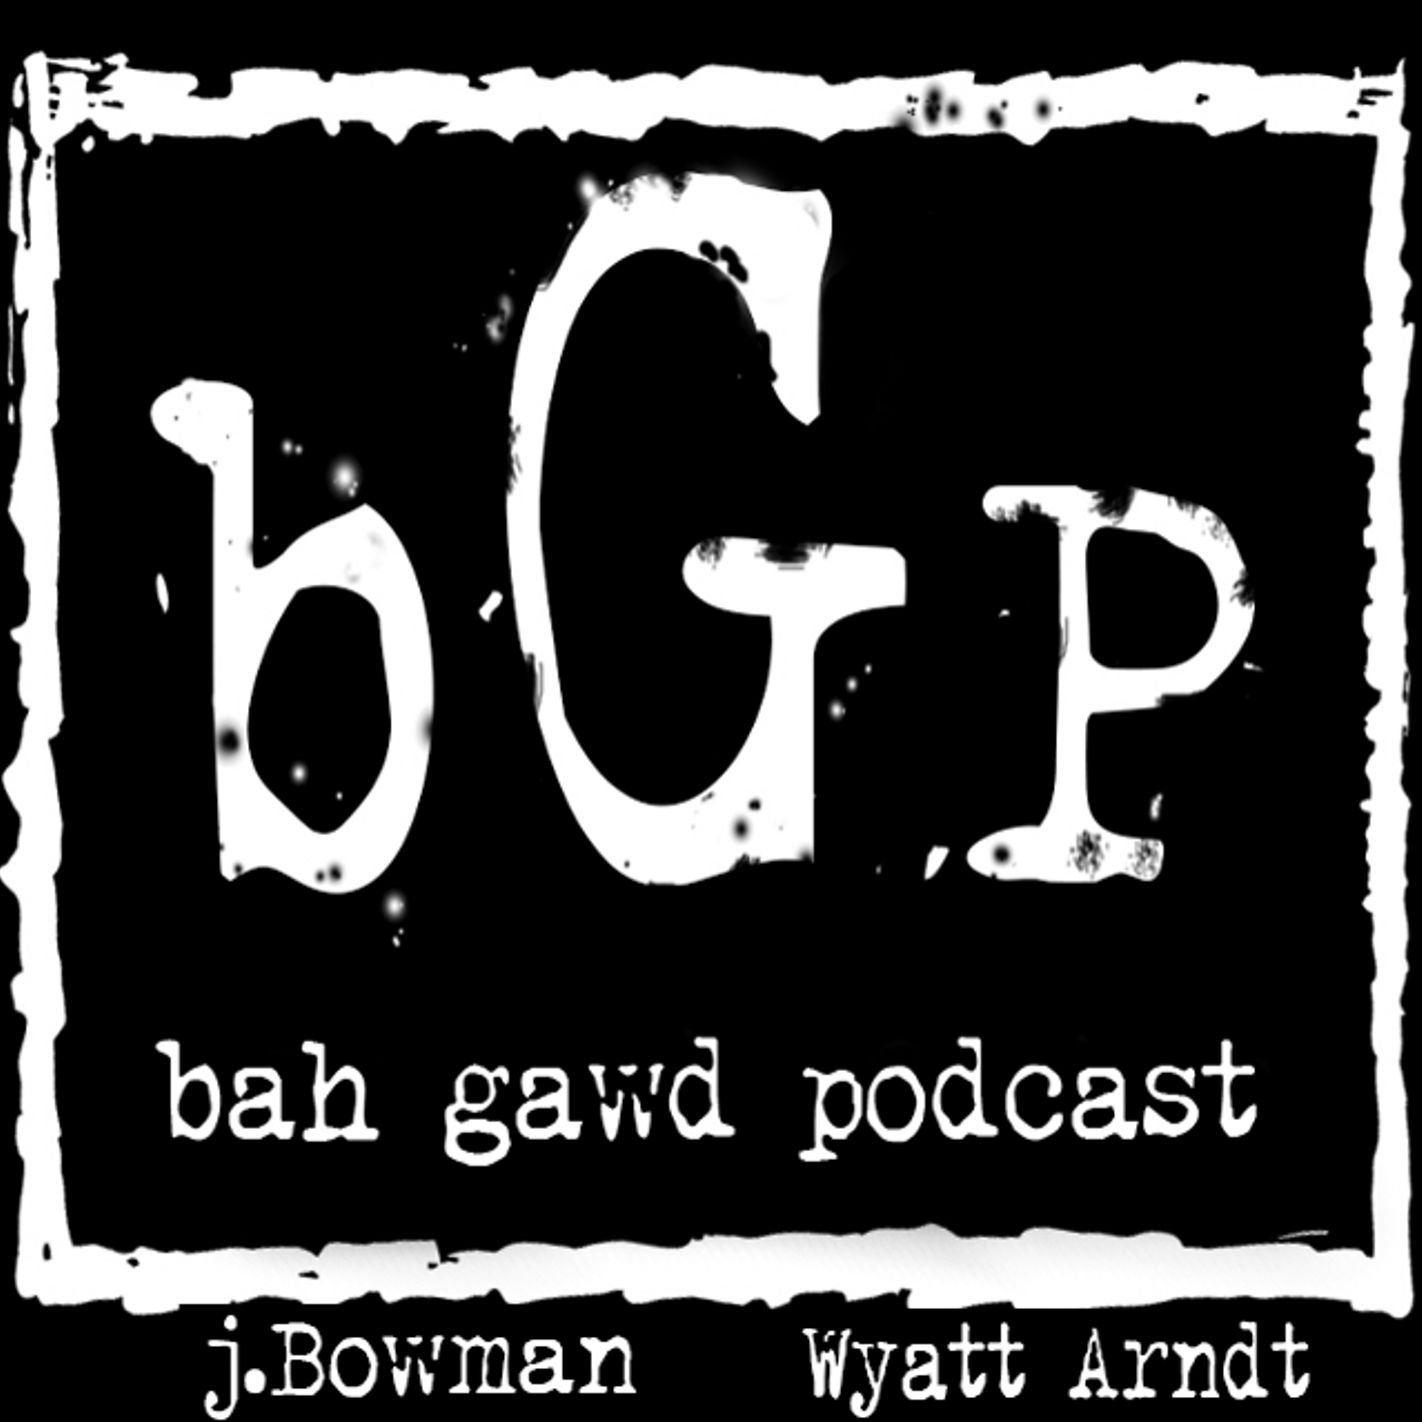 Bah Gawd Podcast!